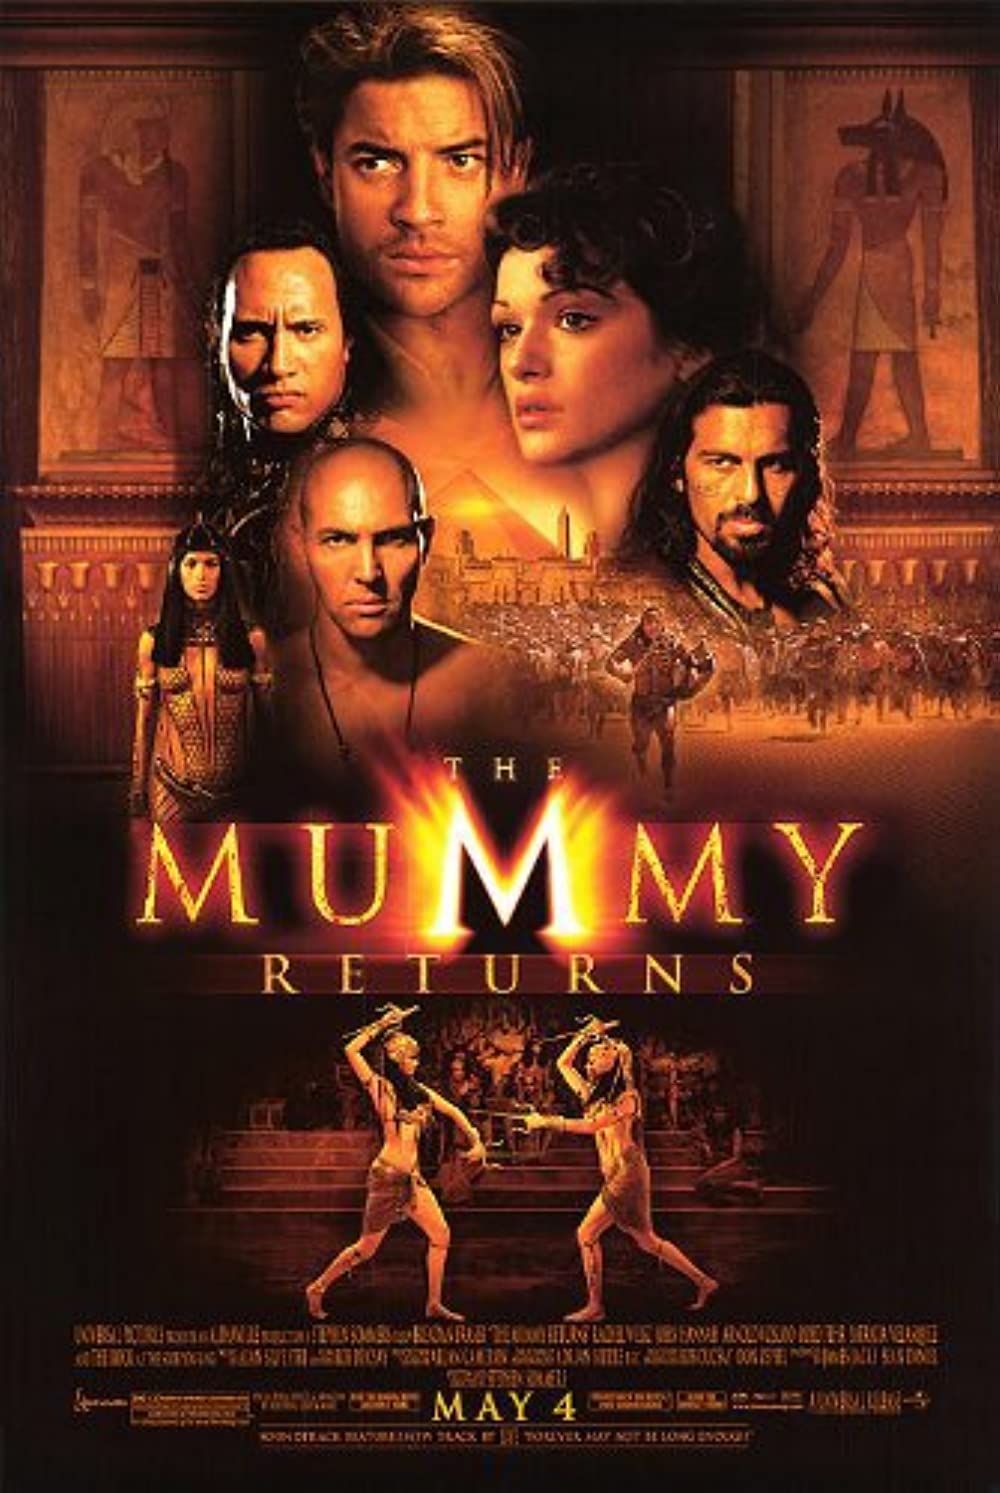 Poster of The Mummy Returns featuring the cast